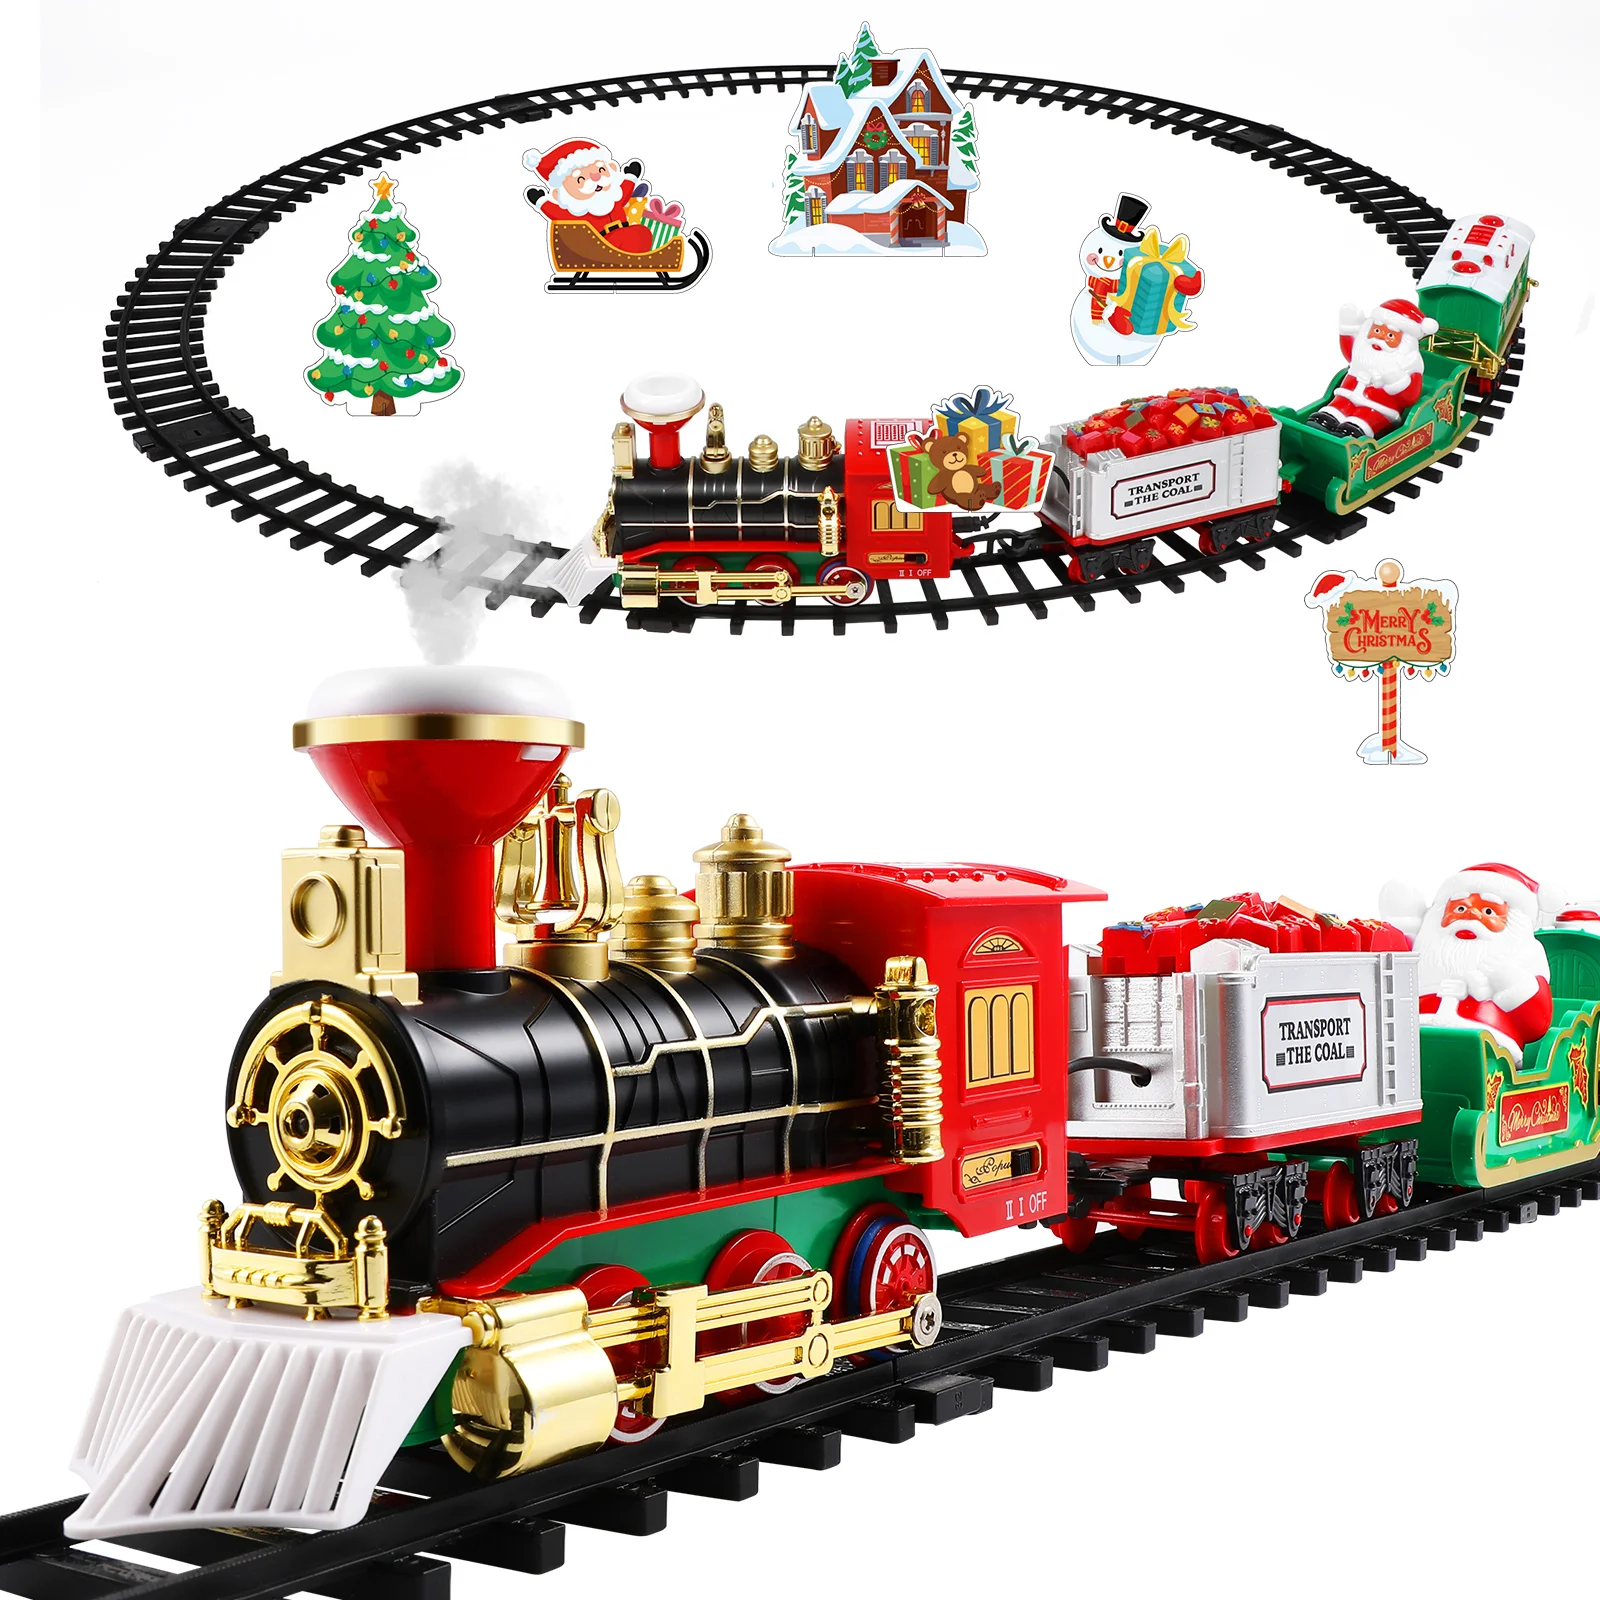 Electric Christmas Train Model Railway Tracks Toy With Sound Light Powered For Kids Birthday Party Gift b o railway classical freight train set passenger water steam locomotive playset with smoke simulation model electric train toys